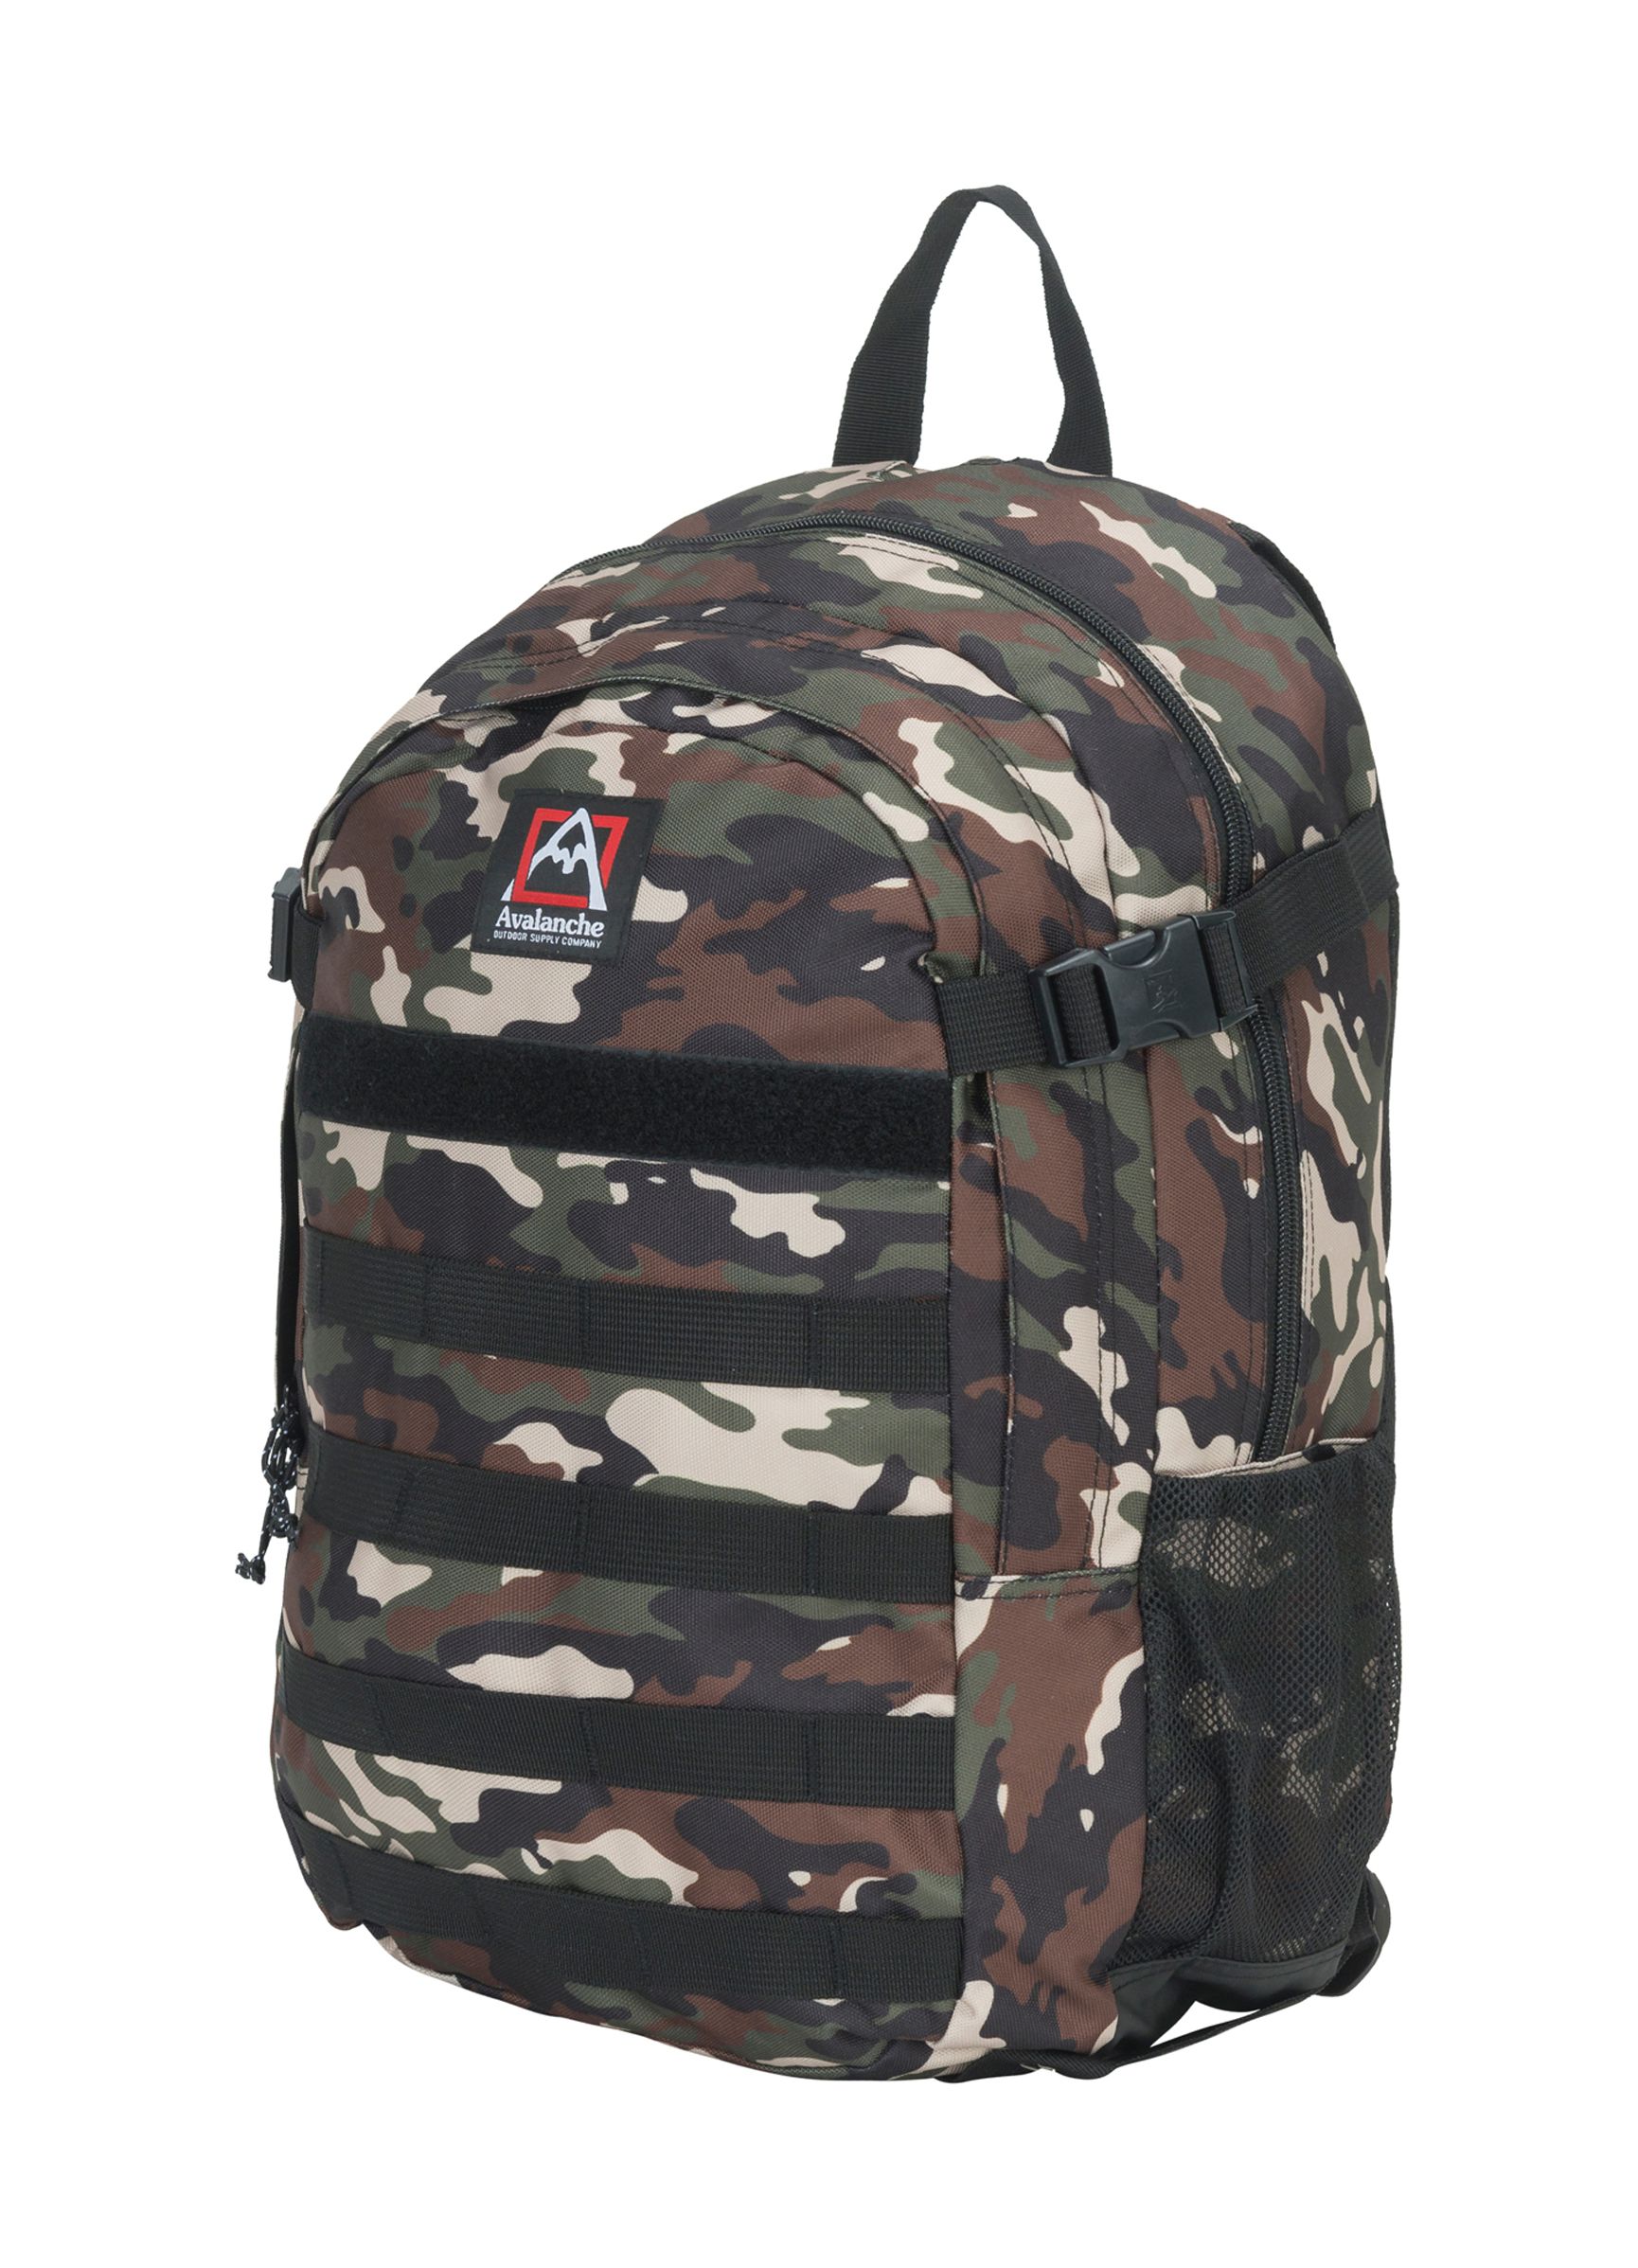 Avalanche Outdoors Camo 22 Liter Sports Hiking Backpack With Water Bottle Pockets - image 2 of 4